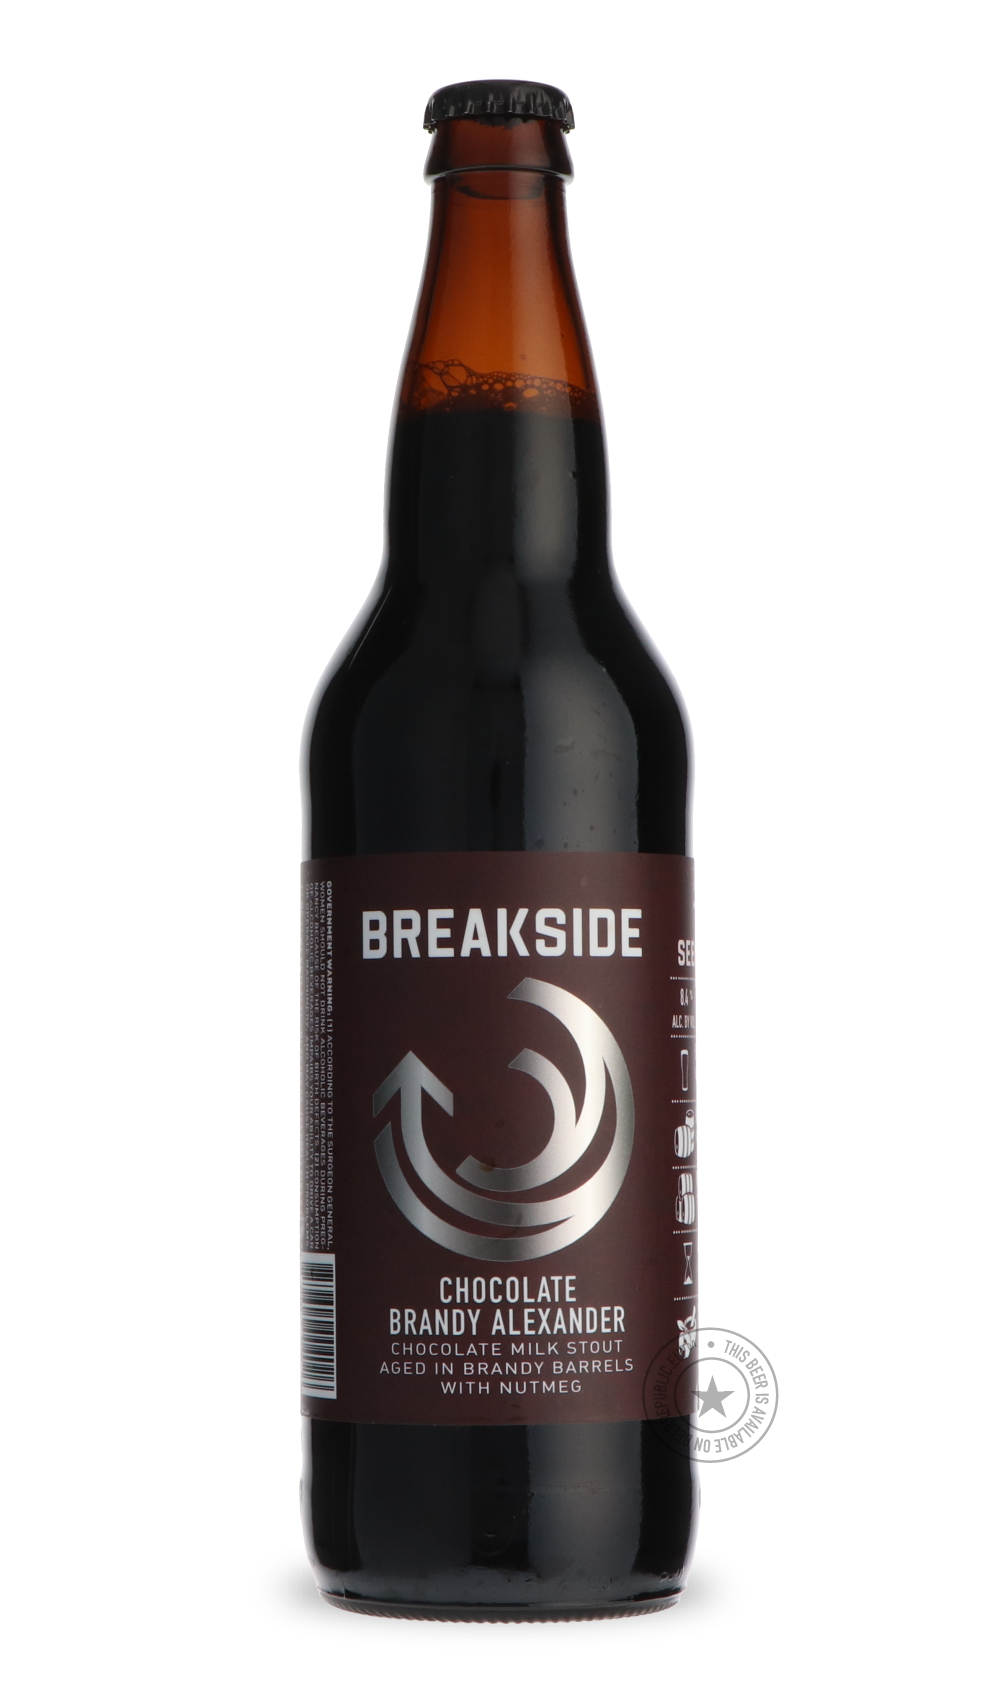 -Breakside- Chocolate Brandy Alexander-Stout & Porter- Only @ Beer Republic - The best online beer store for American & Canadian craft beer - Buy beer online from the USA and Canada - Bier online kopen - Amerikaans bier kopen - Craft beer store - Craft beer kopen - Amerikanisch bier kaufen - Bier online kaufen - Acheter biere online - IPA - Stout - Porter - New England IPA - Hazy IPA - Imperial Stout - Barrel Aged - Barrel Aged Imperial Stout - Brown - Dark beer - Blond - Blonde - Pilsner - Lager - Wheat - 